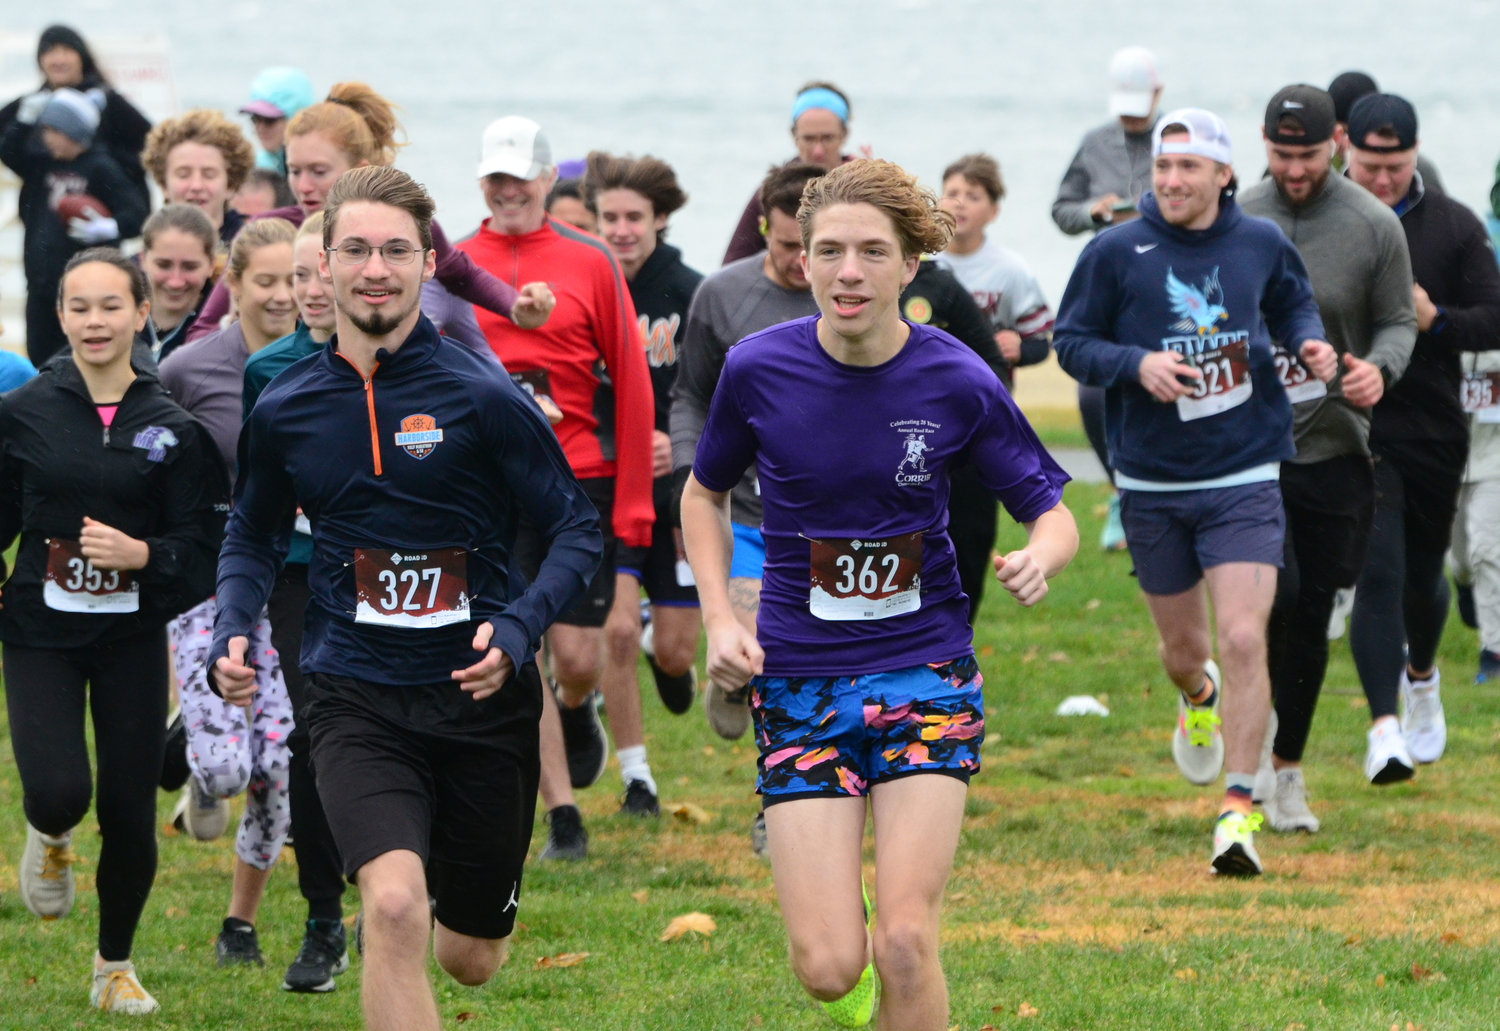 Declan Reed (left, number 327) and Owen Schneck (number 362) lead the group across the field at Bristol Town Beach to start the fundraising race on Saturday.